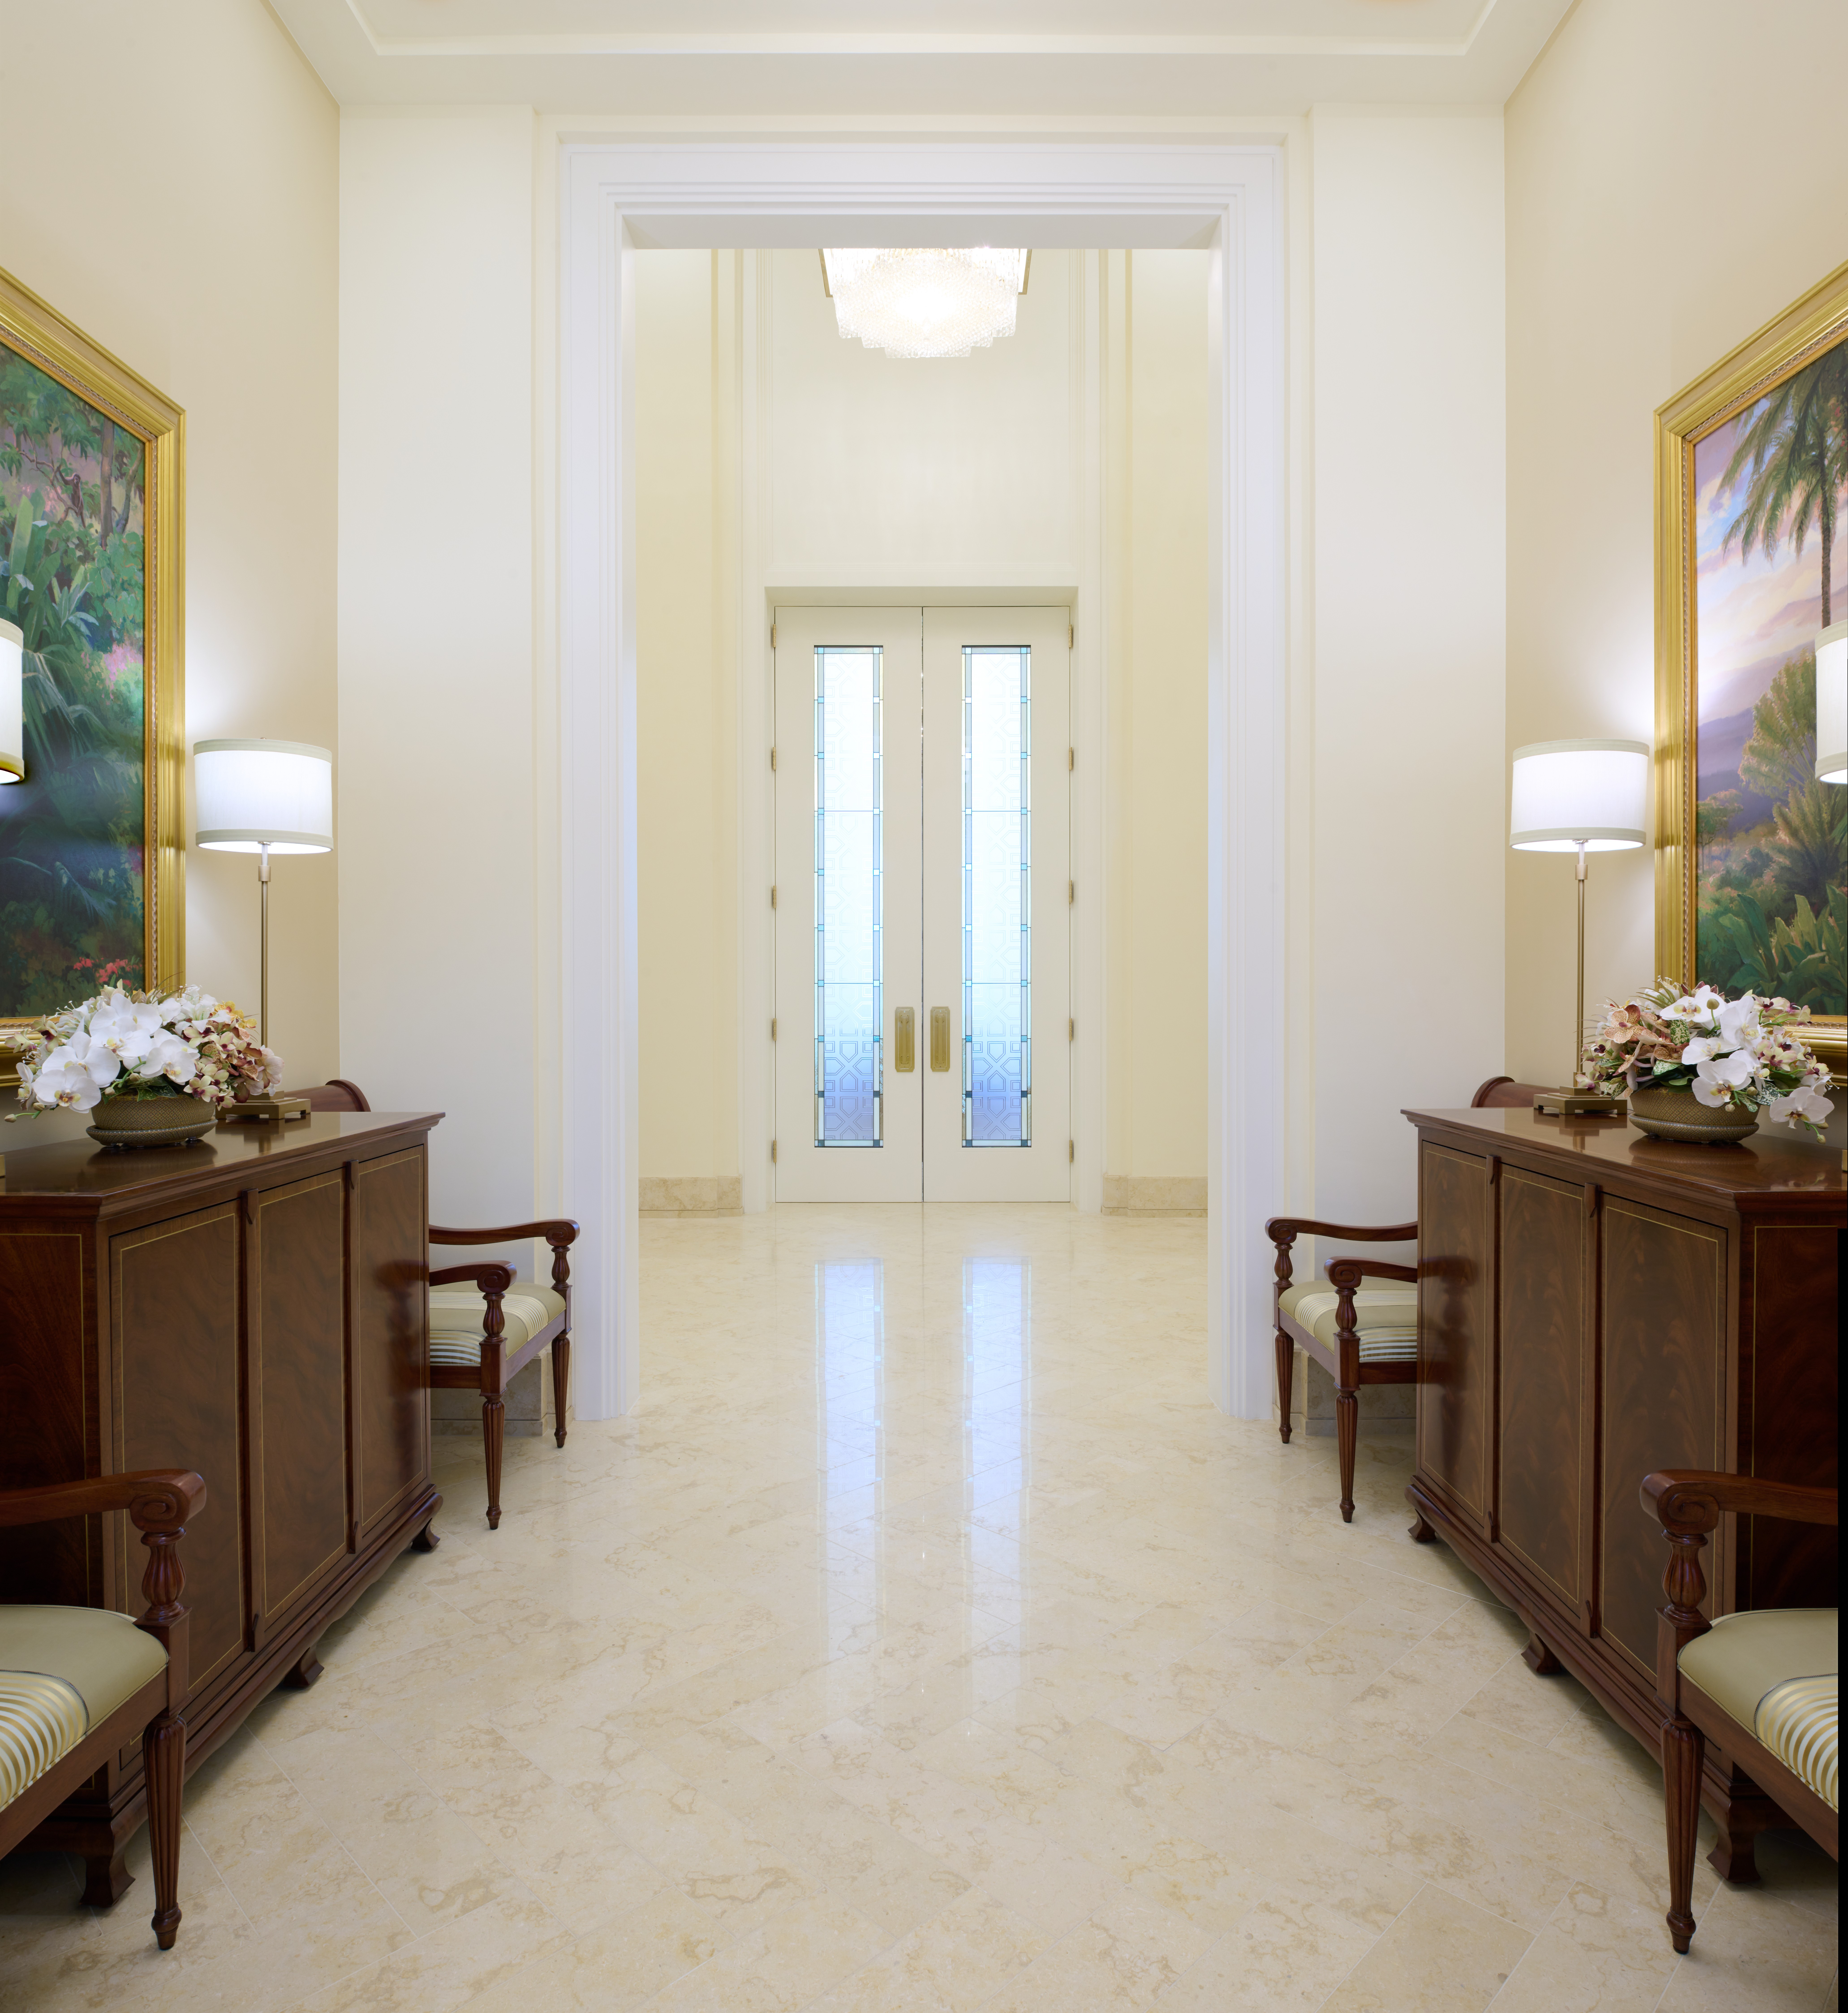 A white hallway with rectangular doors at the end and dark-wood furniture on the sides.